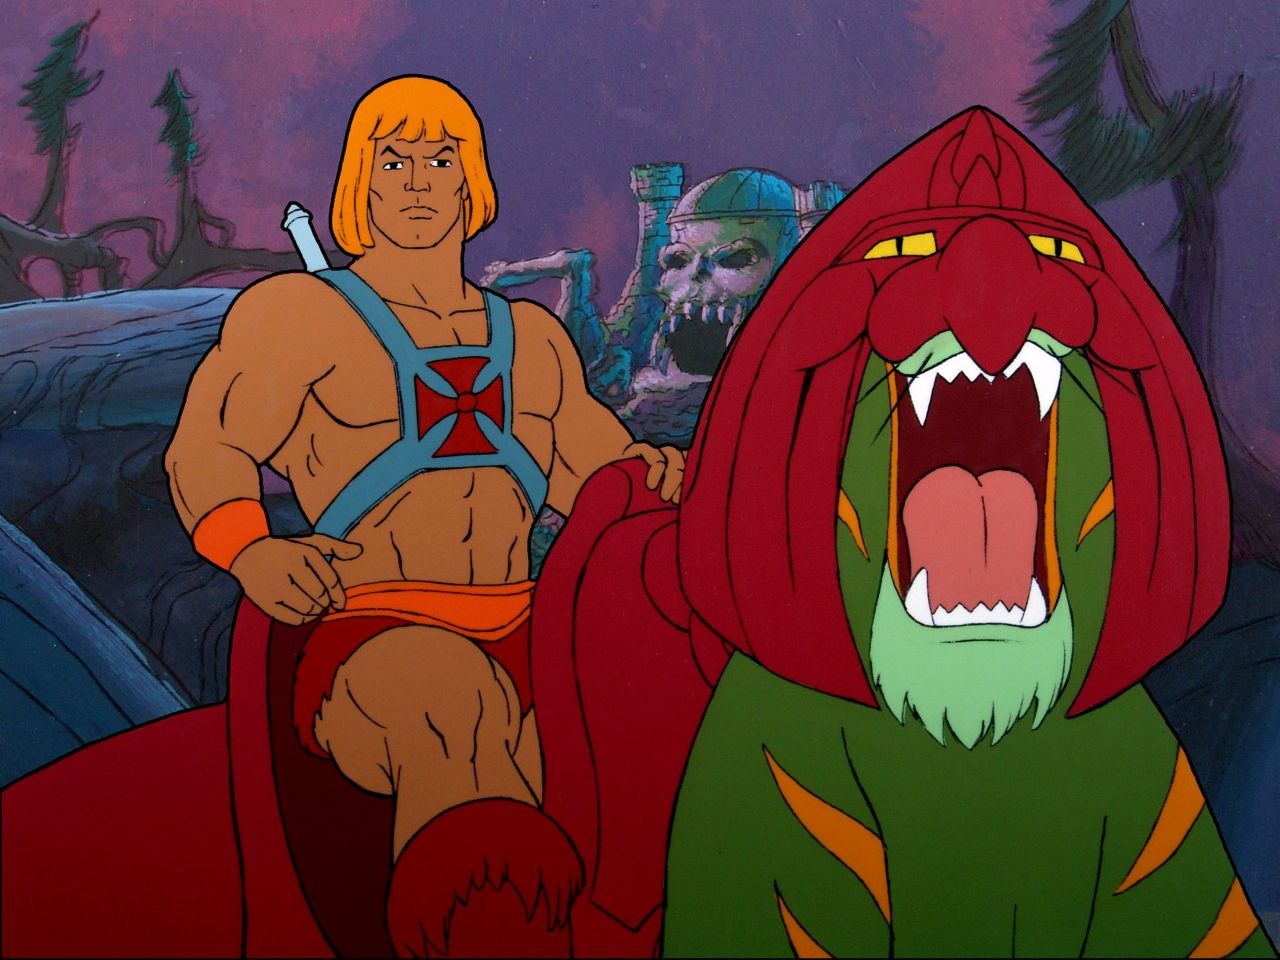 he man part of lovefilm retro cartoon resurgence 80s and 90s kids shows booming image 1